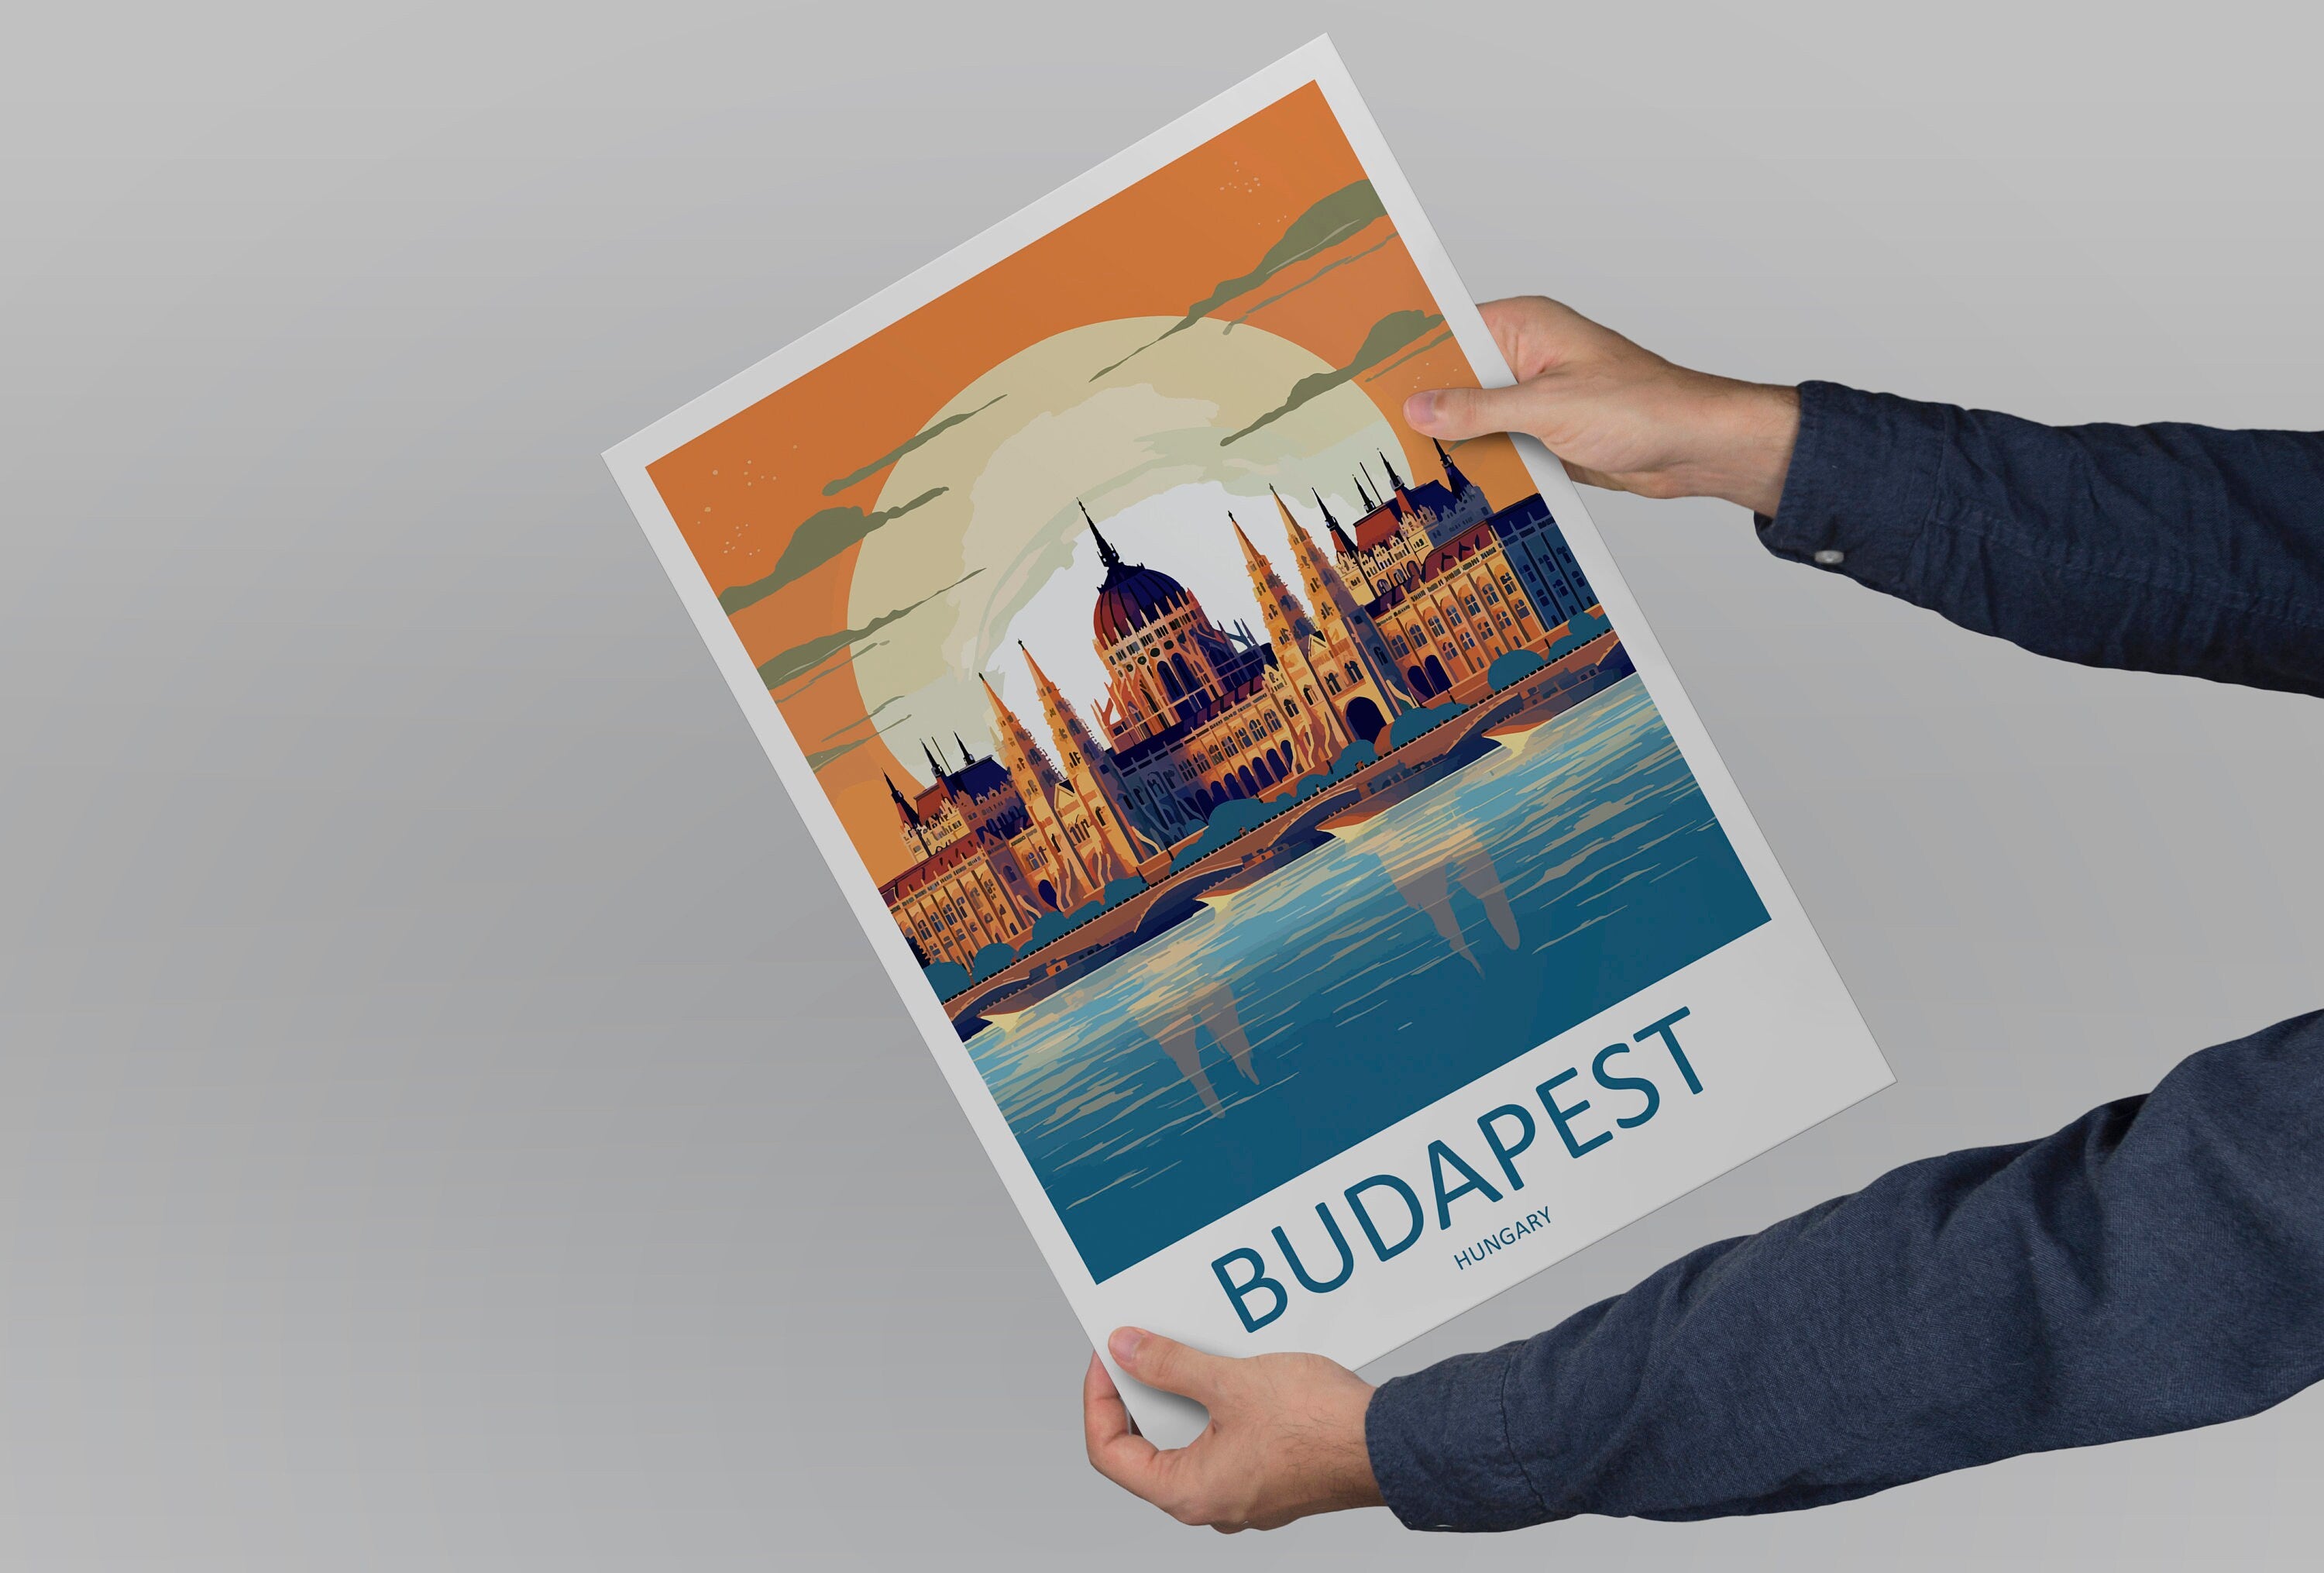 Budapest Travel Print Wall Art Budapest Wall Hanging Home Décor Budapest Gift Art Lovers Hungary Art Lover Gift Budapest Wall Décor